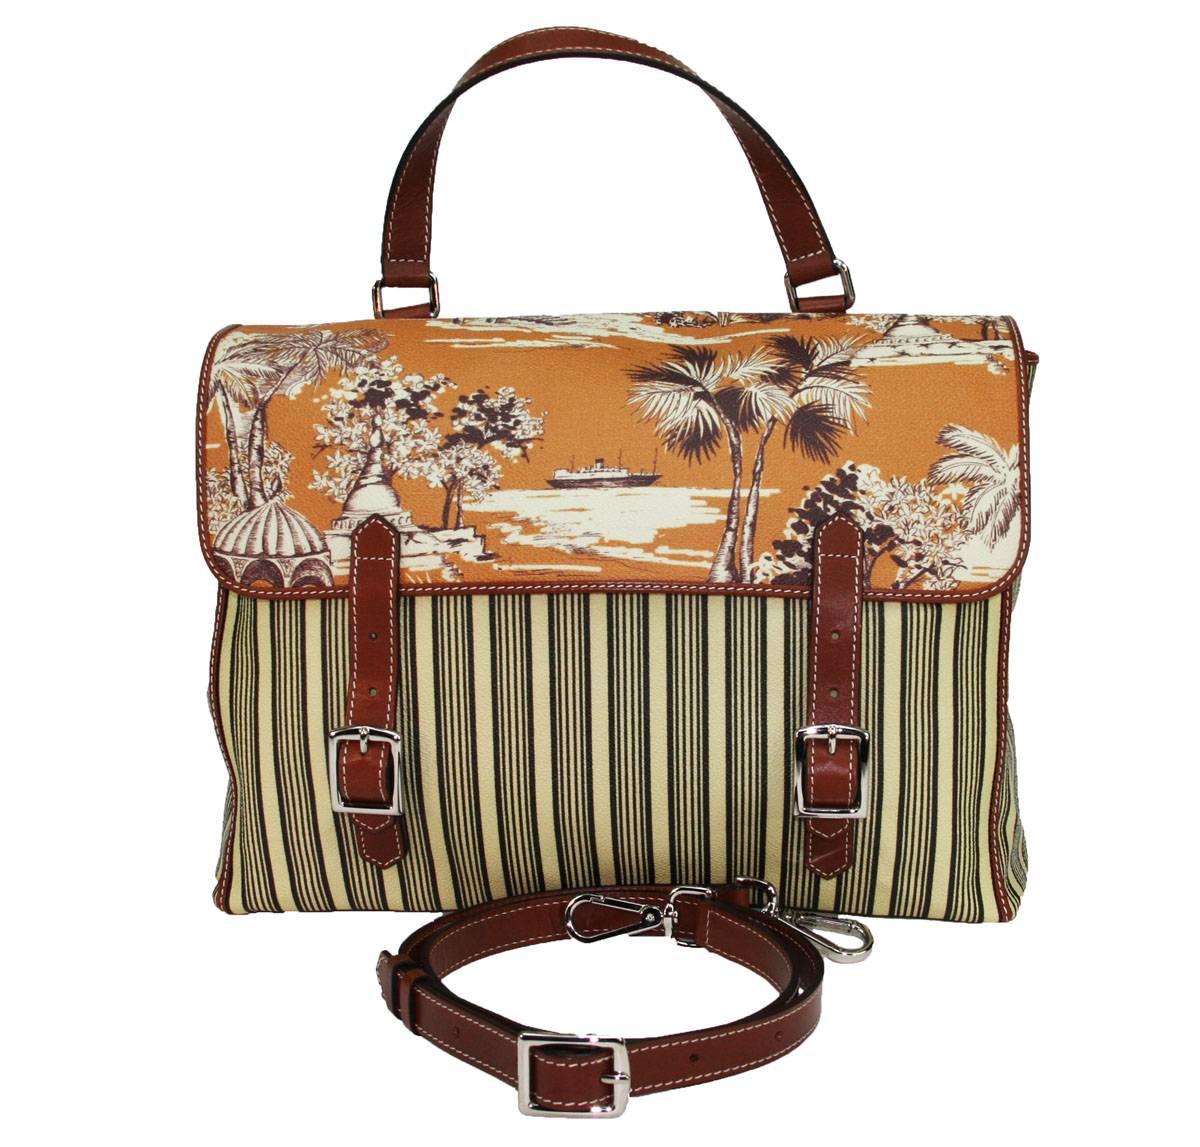 New ETRO Satchel Messenger Tropical Images Coated Canvas Top Hand Bag